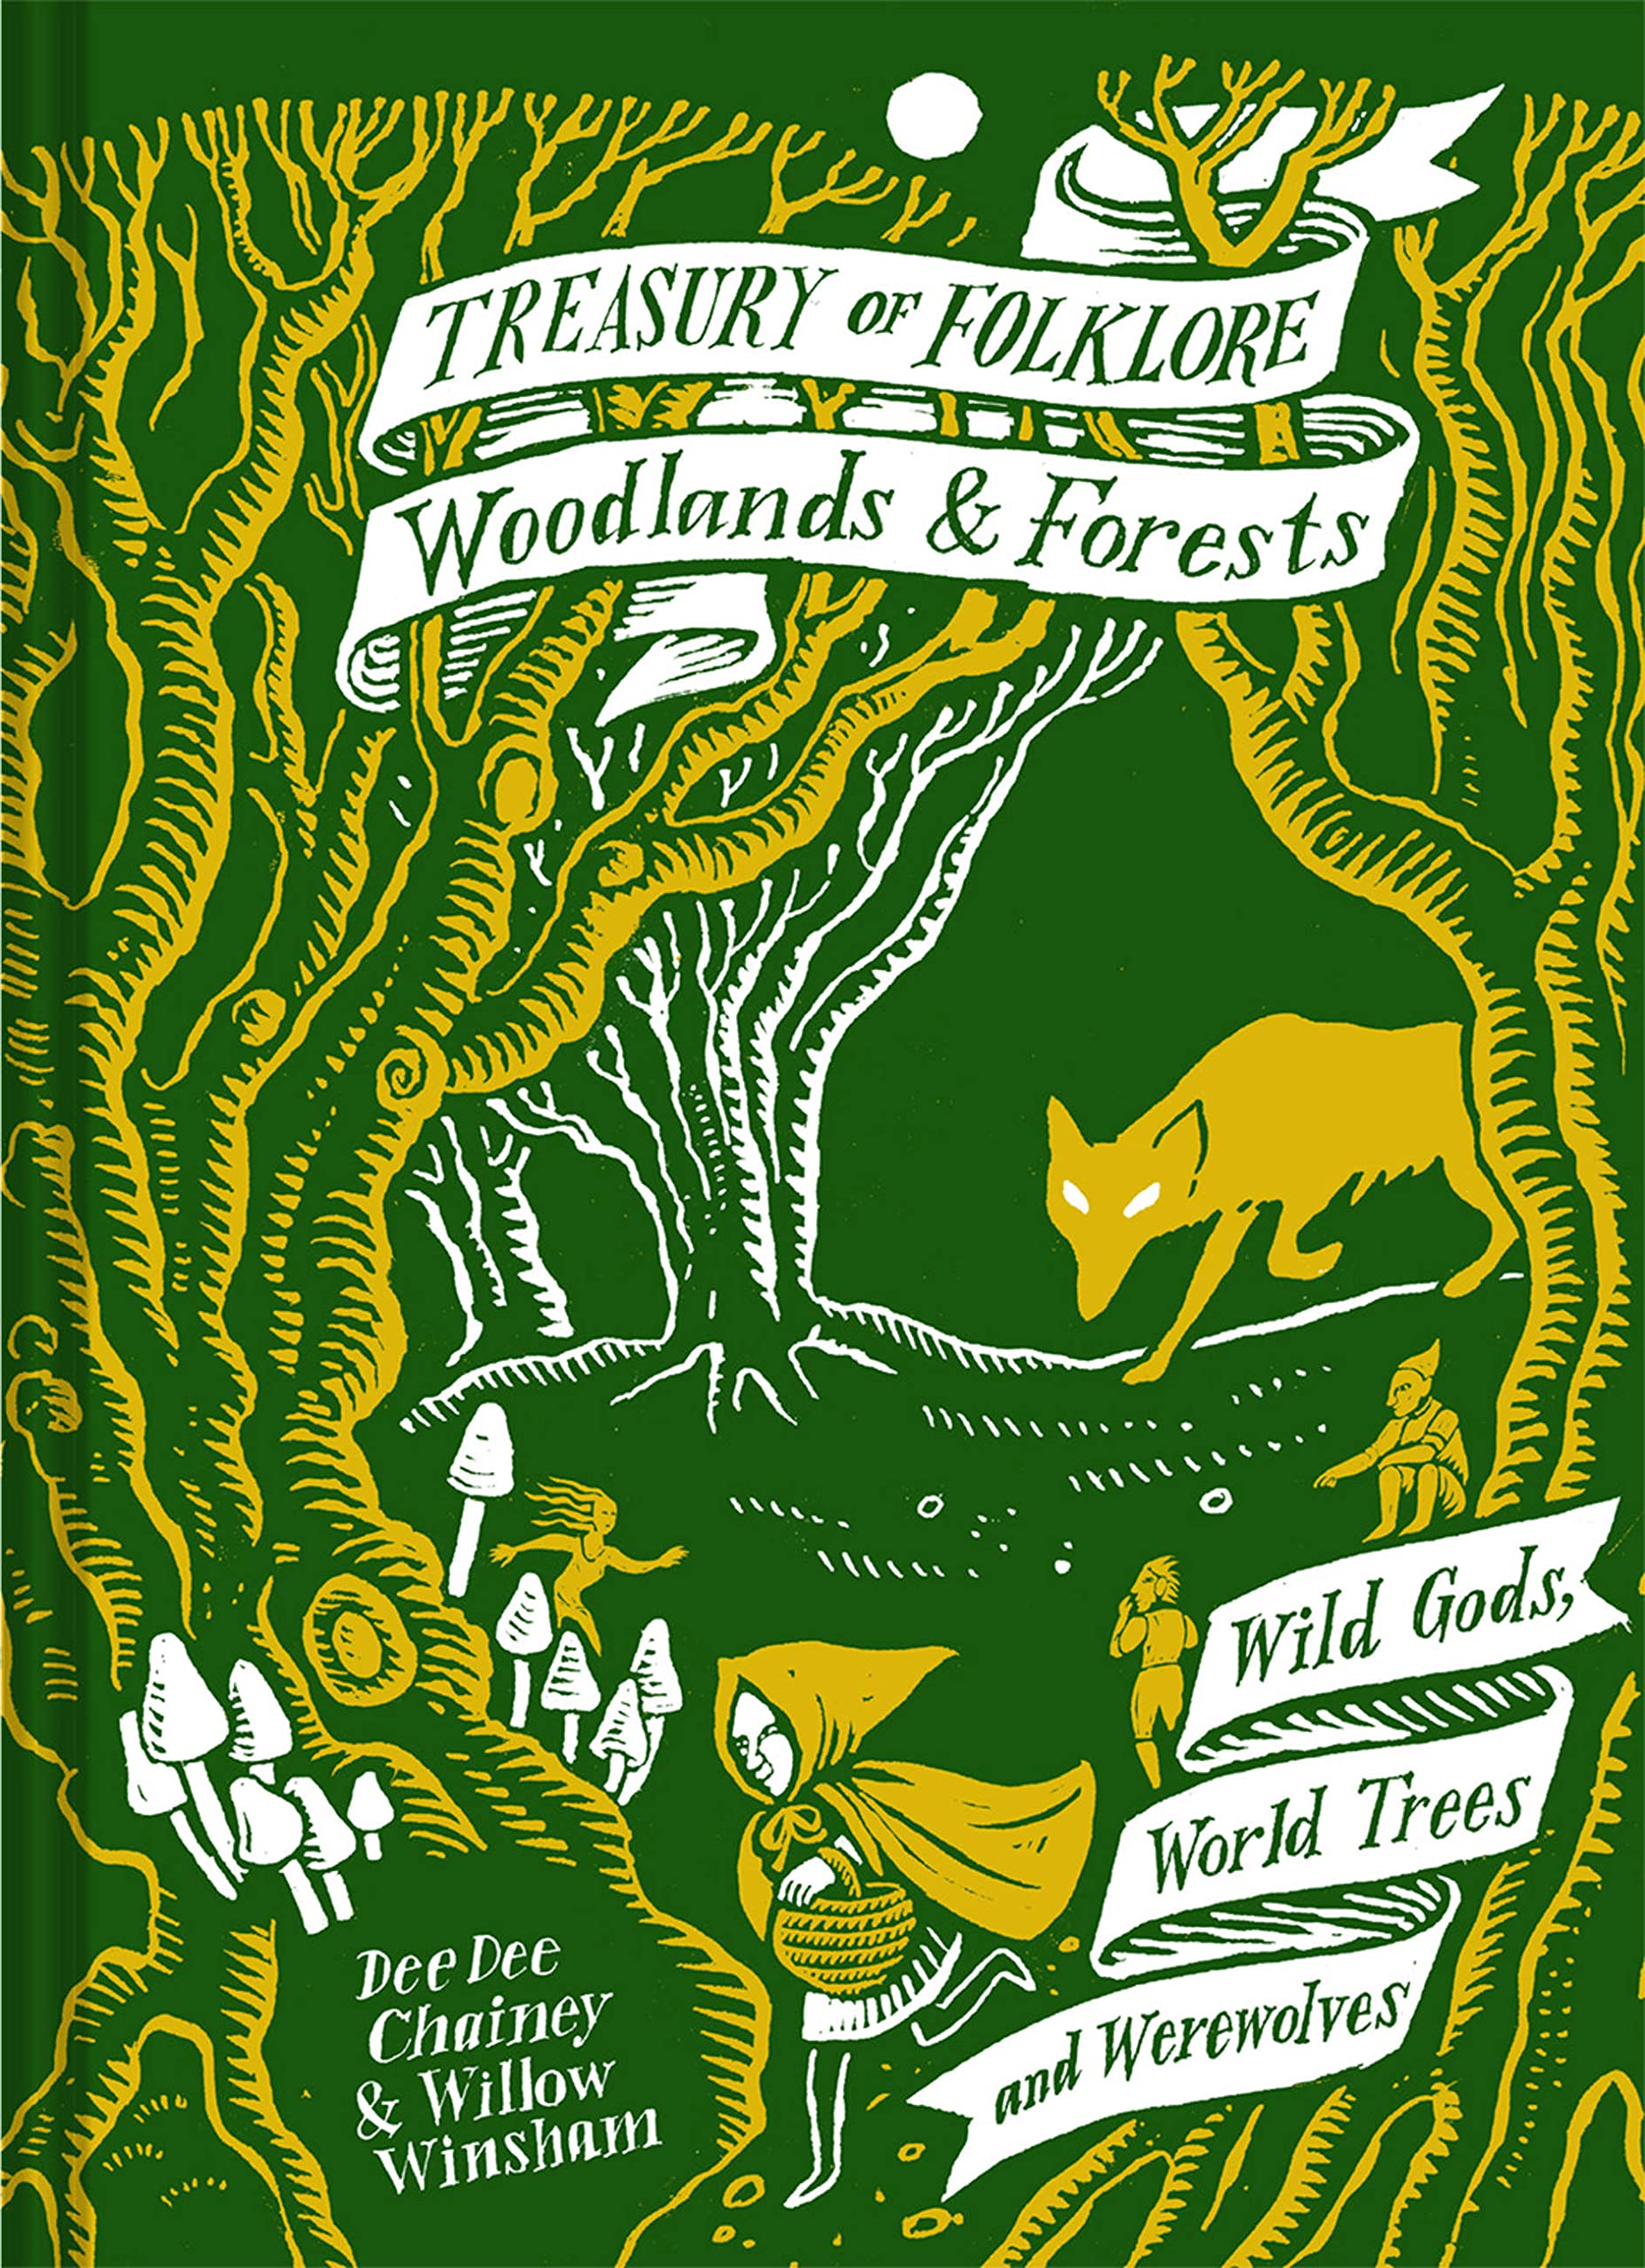 Woodlands and Forests | Dee Dee Chainey, Willow Winsham